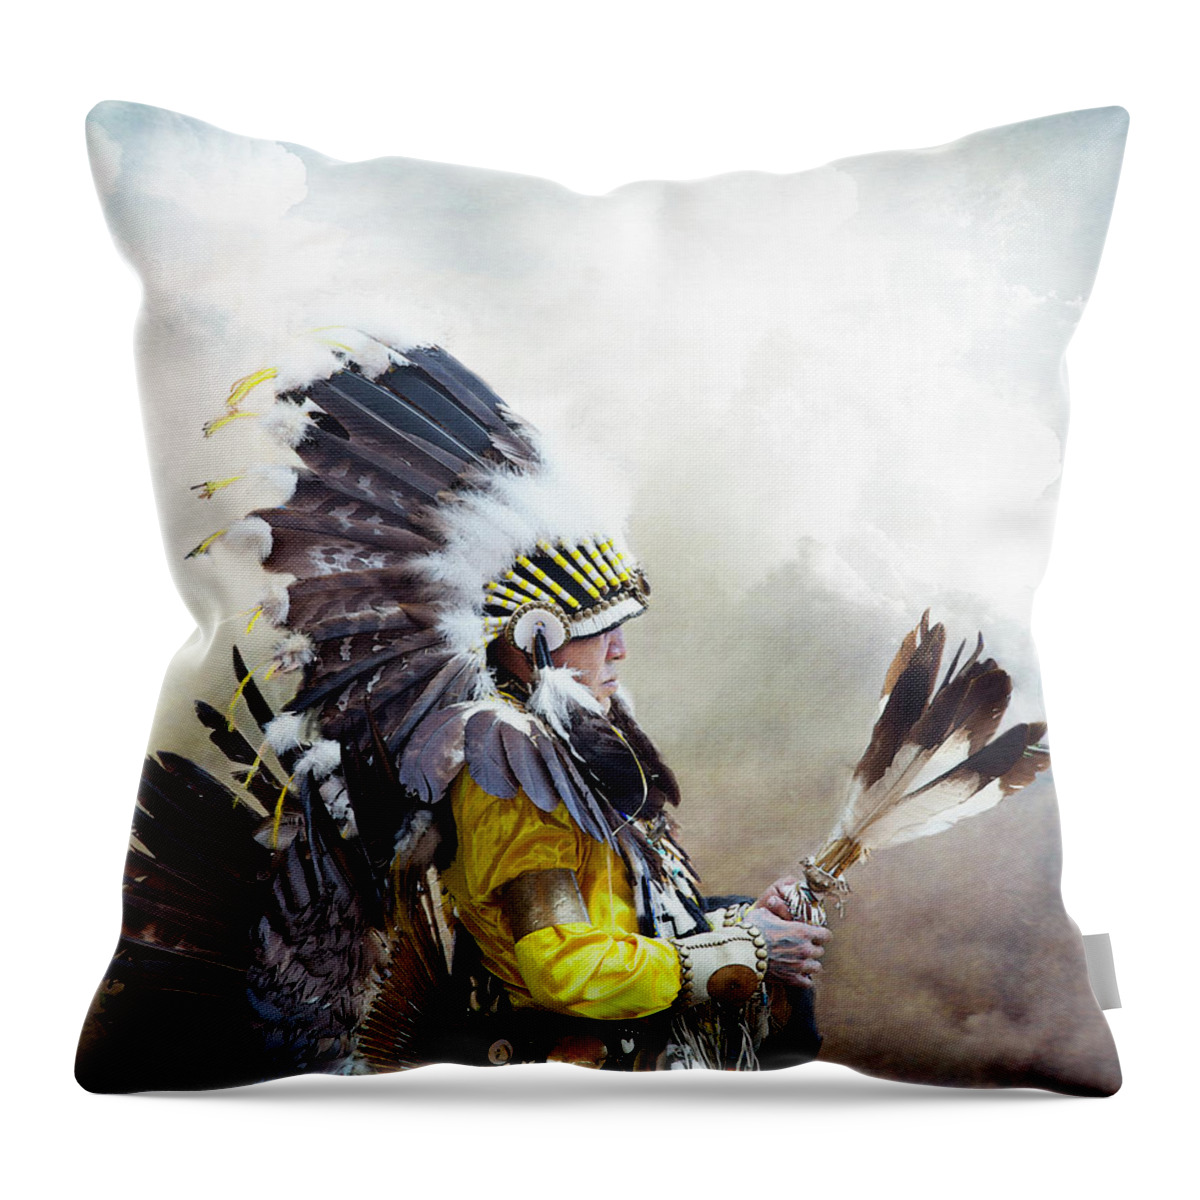 Theresa Tahara Throw Pillow featuring the photograph First Nations Chief by Theresa Tahara